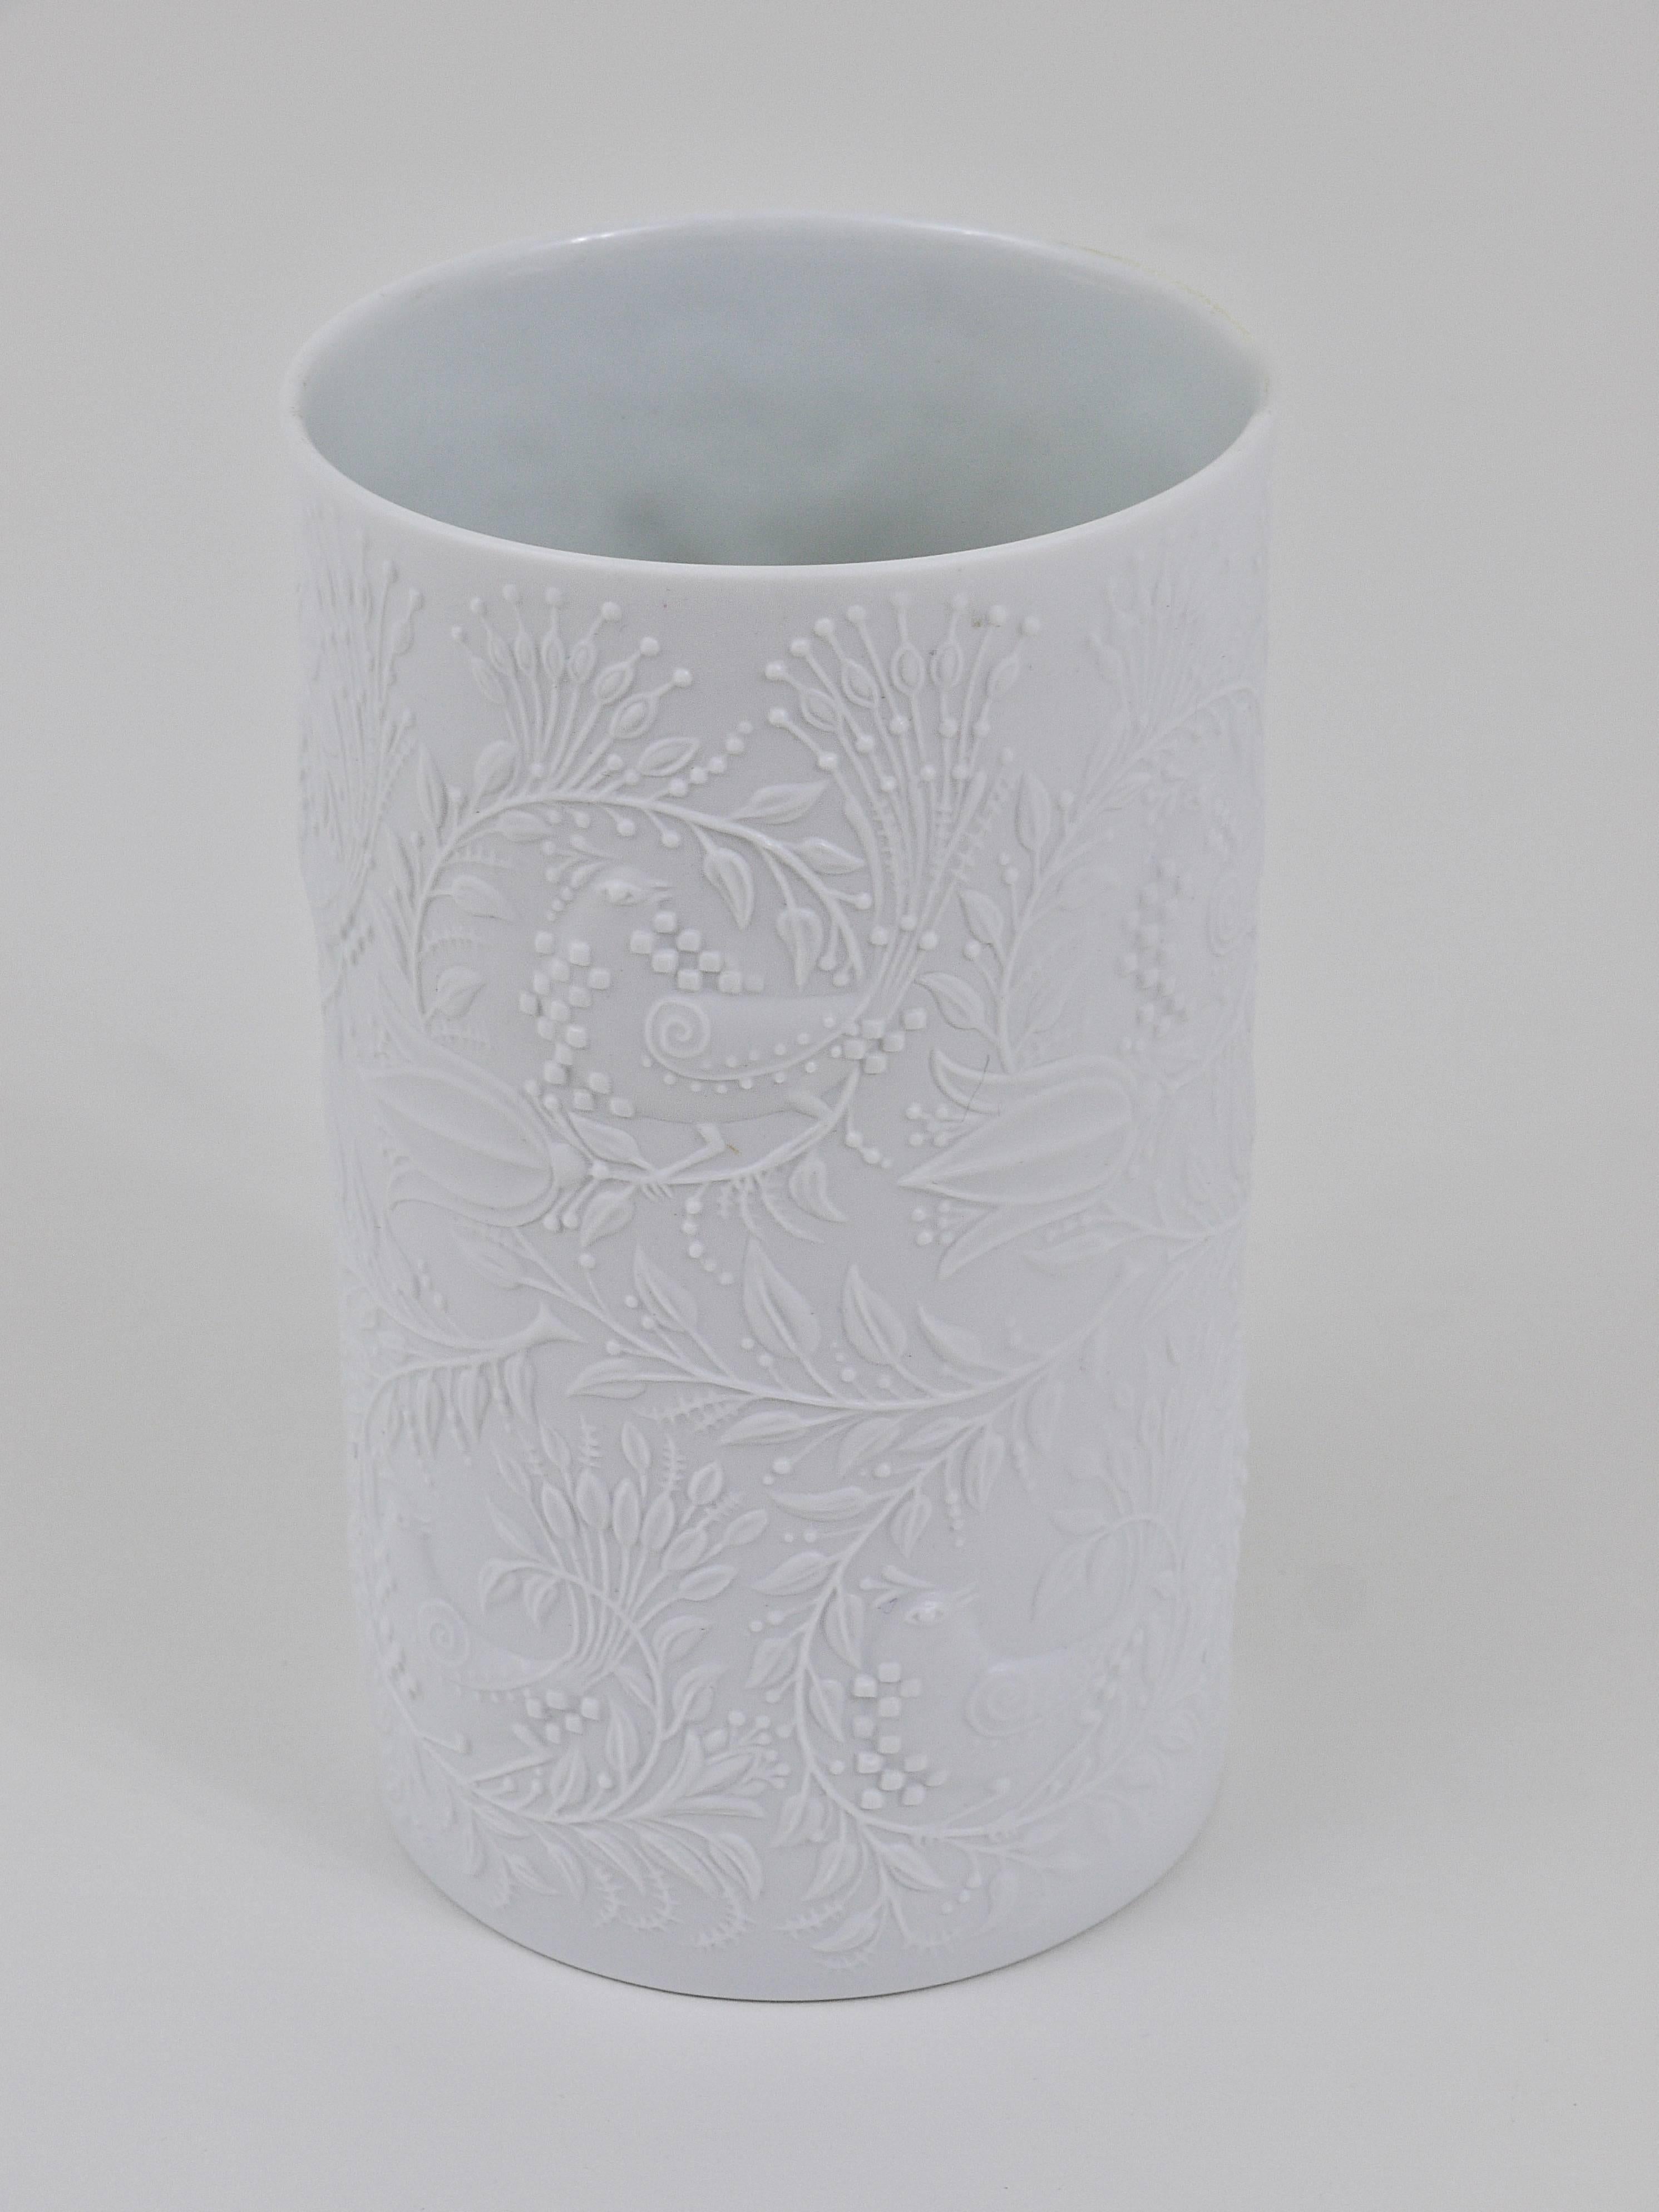 A beautiful white matte relief op-art porcelain vase from the 1960s, designed by Bjorn Wiinblad and executed by Rosenthal Studio-Line, Germany. In very good condition.